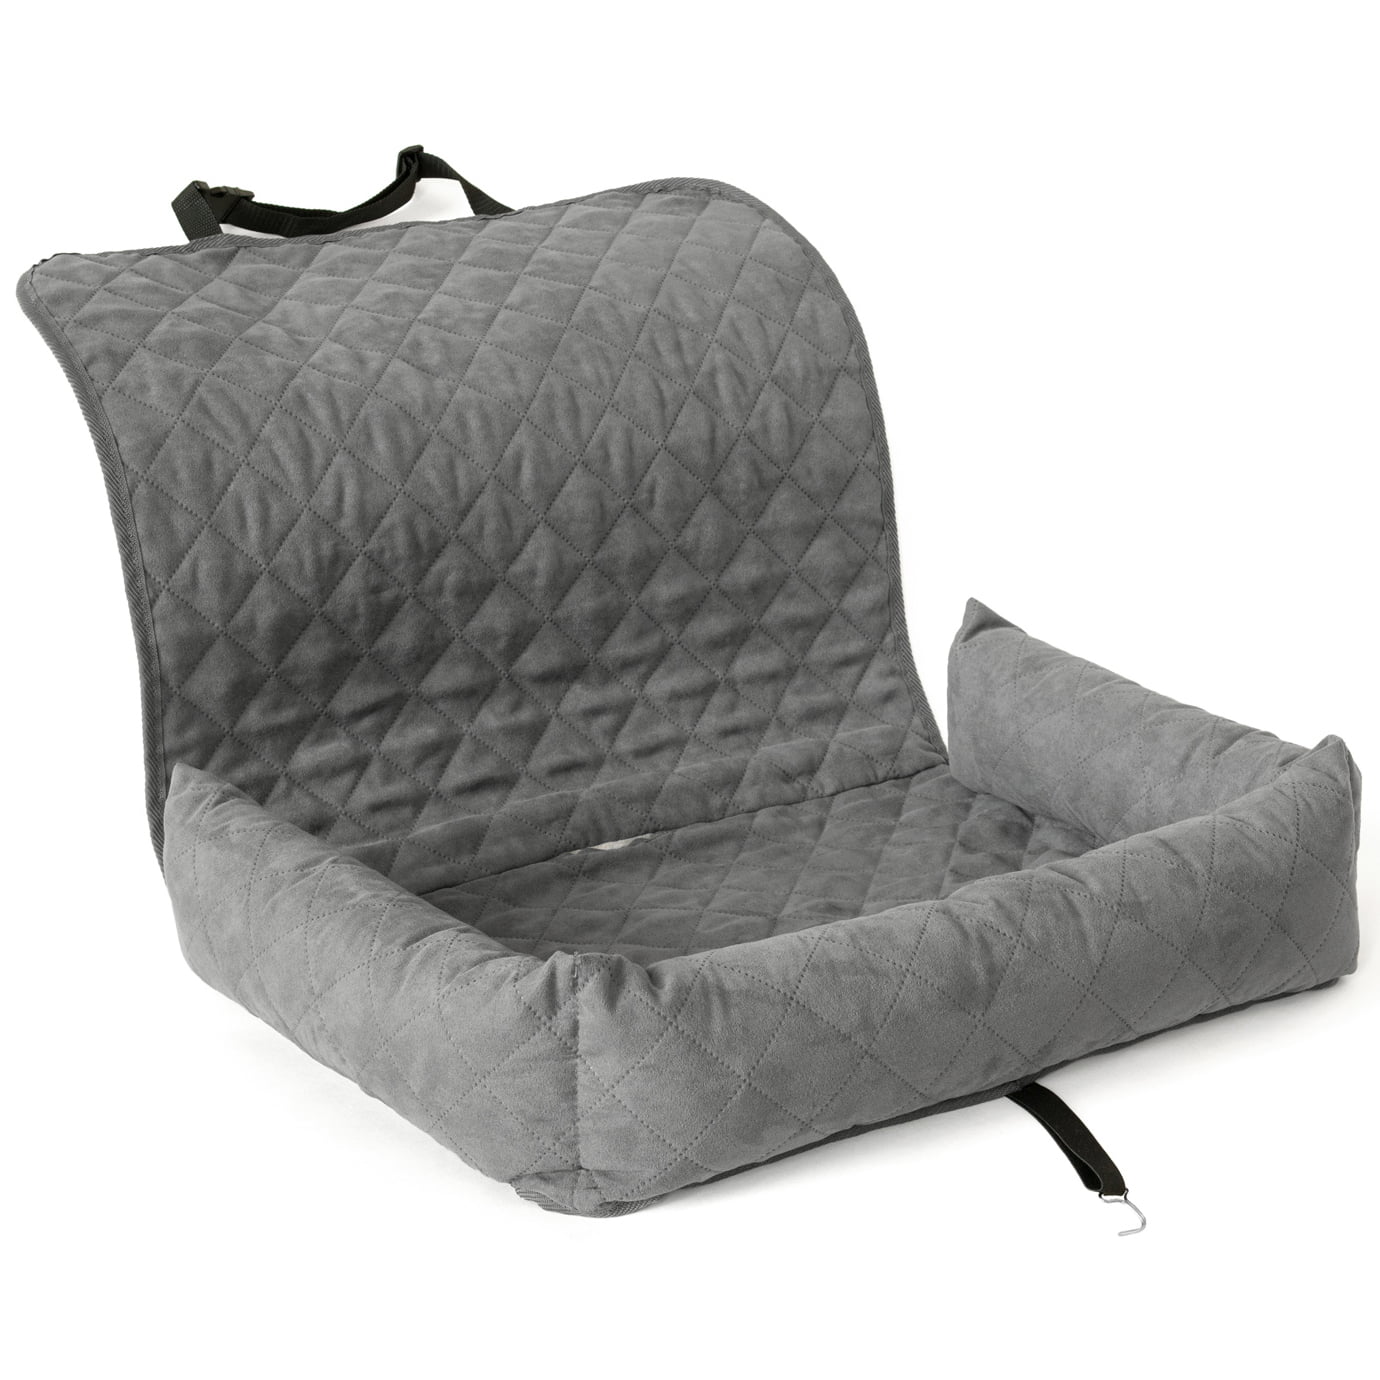 PetBed2Go Grey Large Pet Bed Cushion & Car Seat Cover 52x20x7